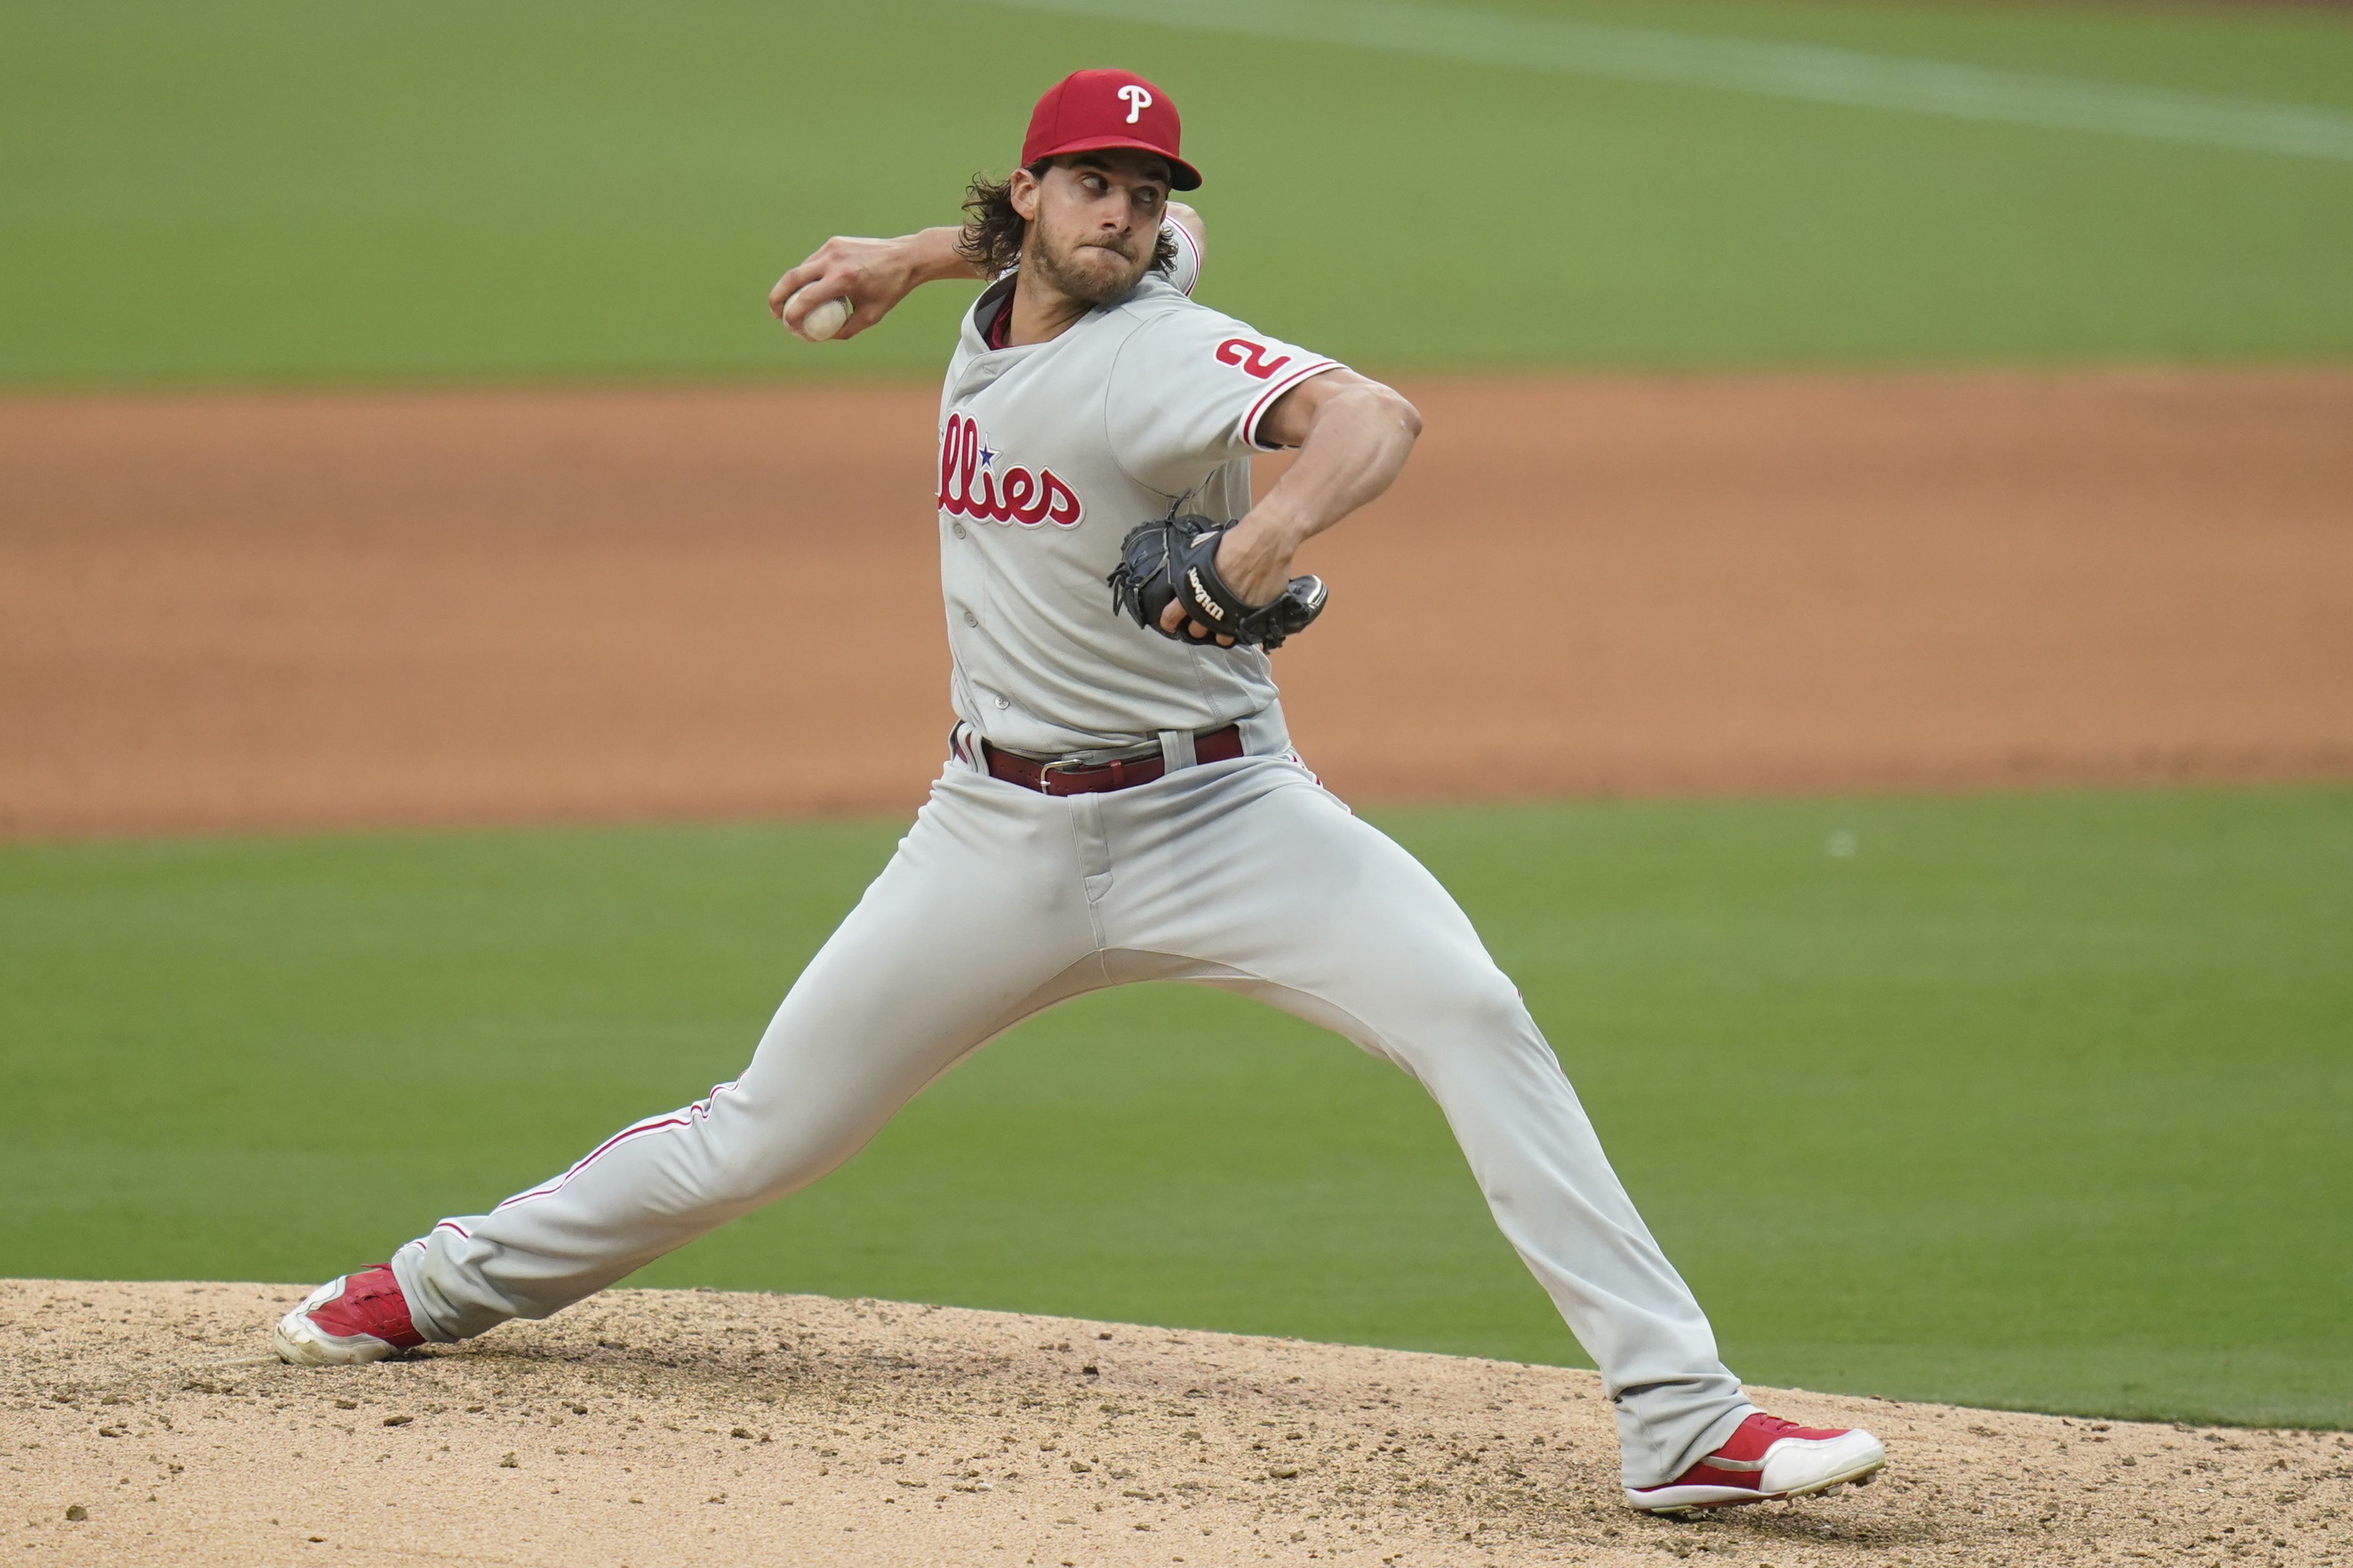 Aaron Nola's night ends in 'heartbreaking' fashion and other